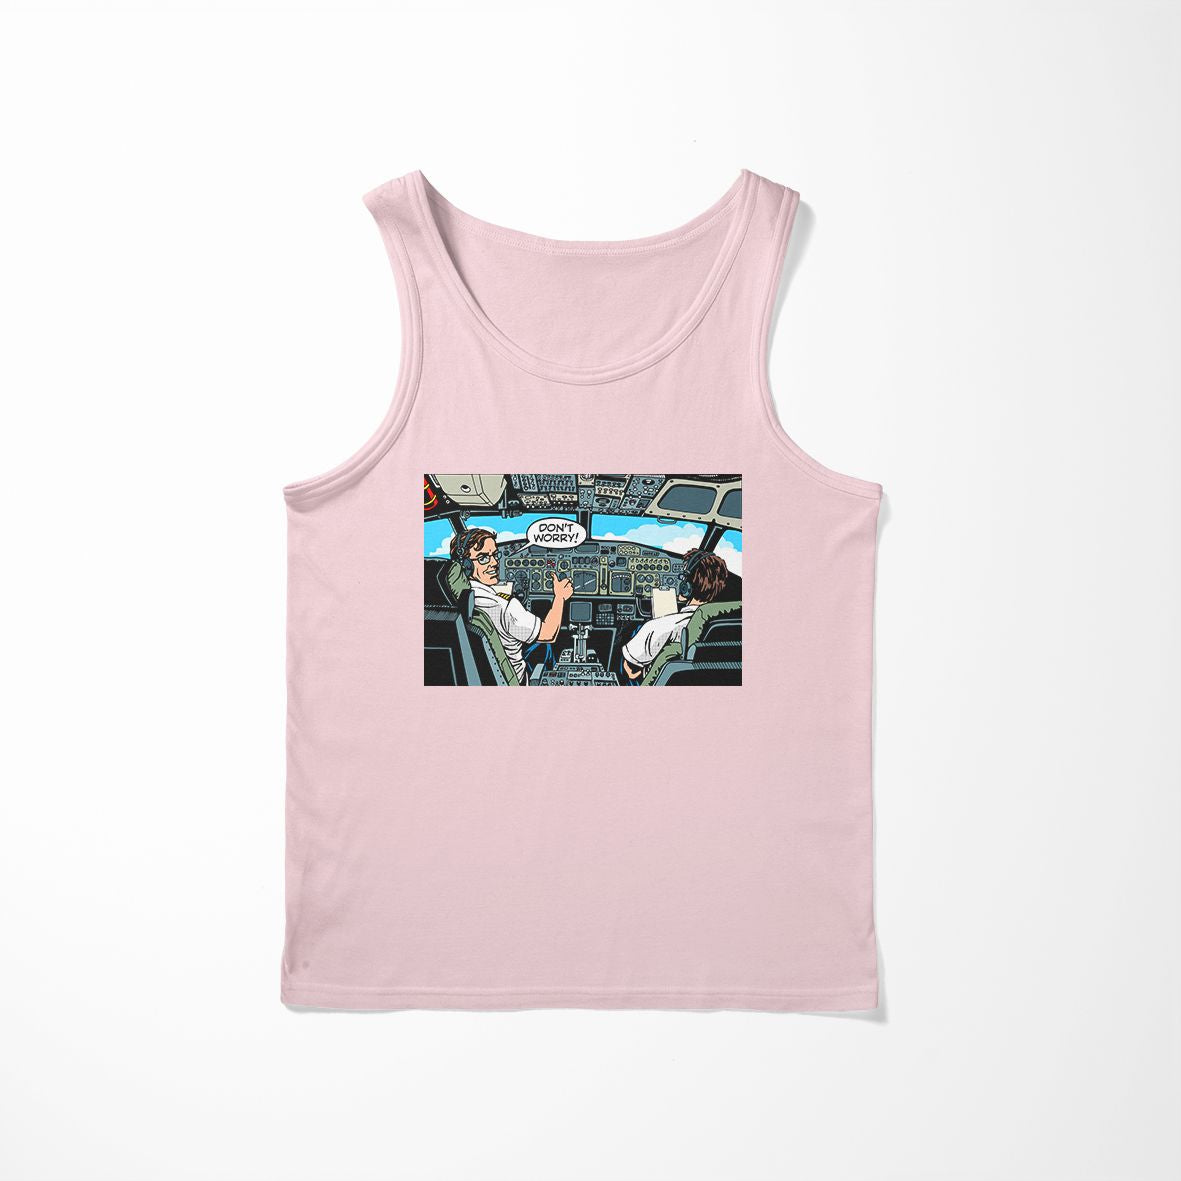 Don't Worry Thumb Up Captain Designed Tank Tops